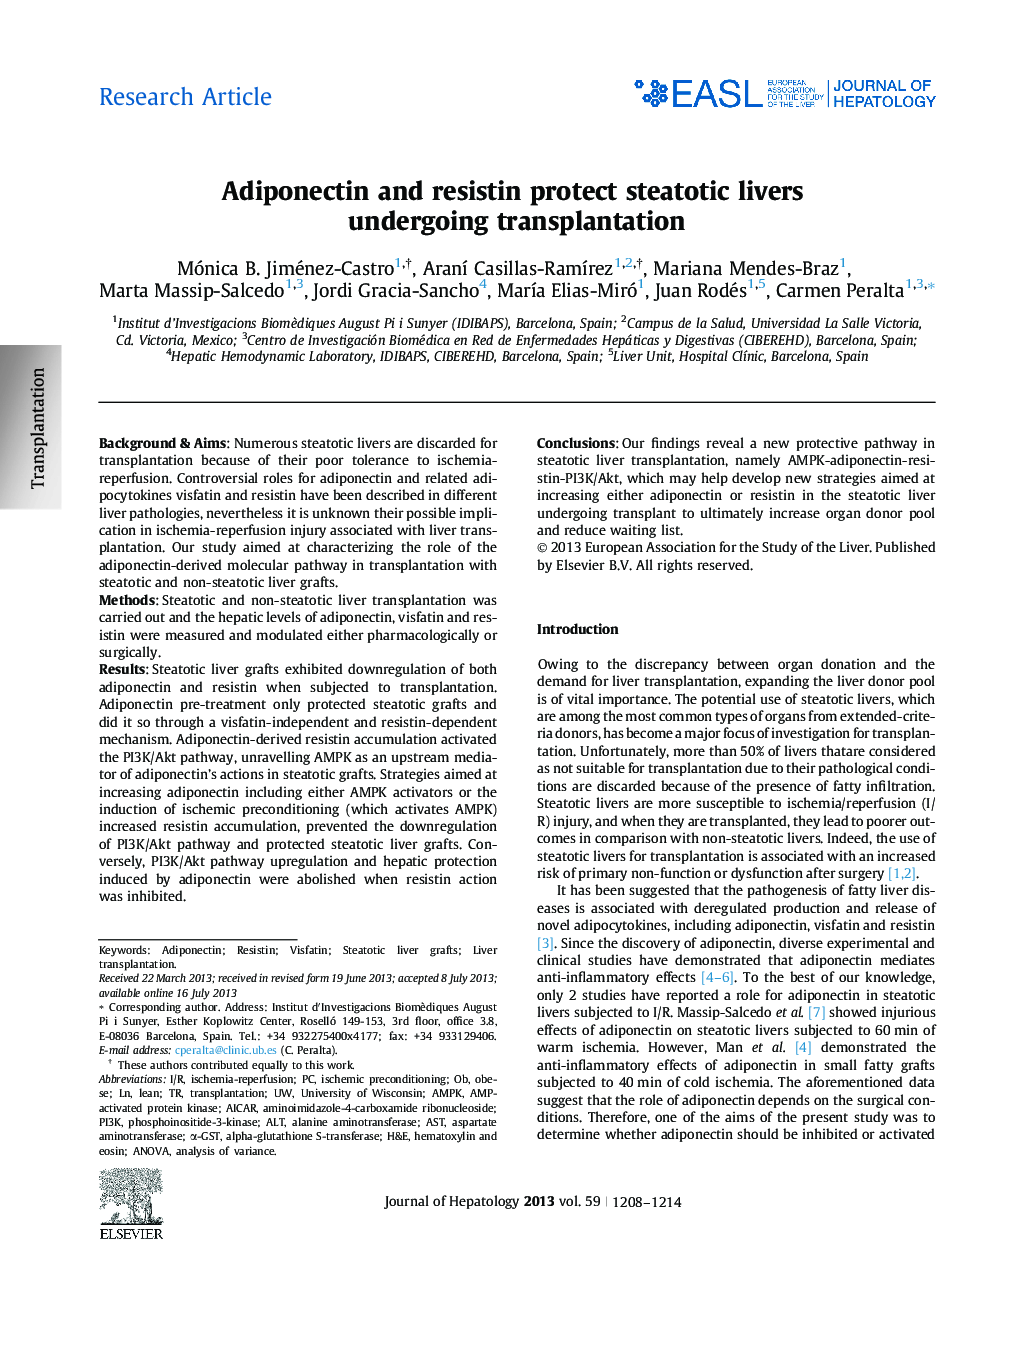 Research ArticleAdiponectin and resistin protect steatotic livers undergoing transplantation